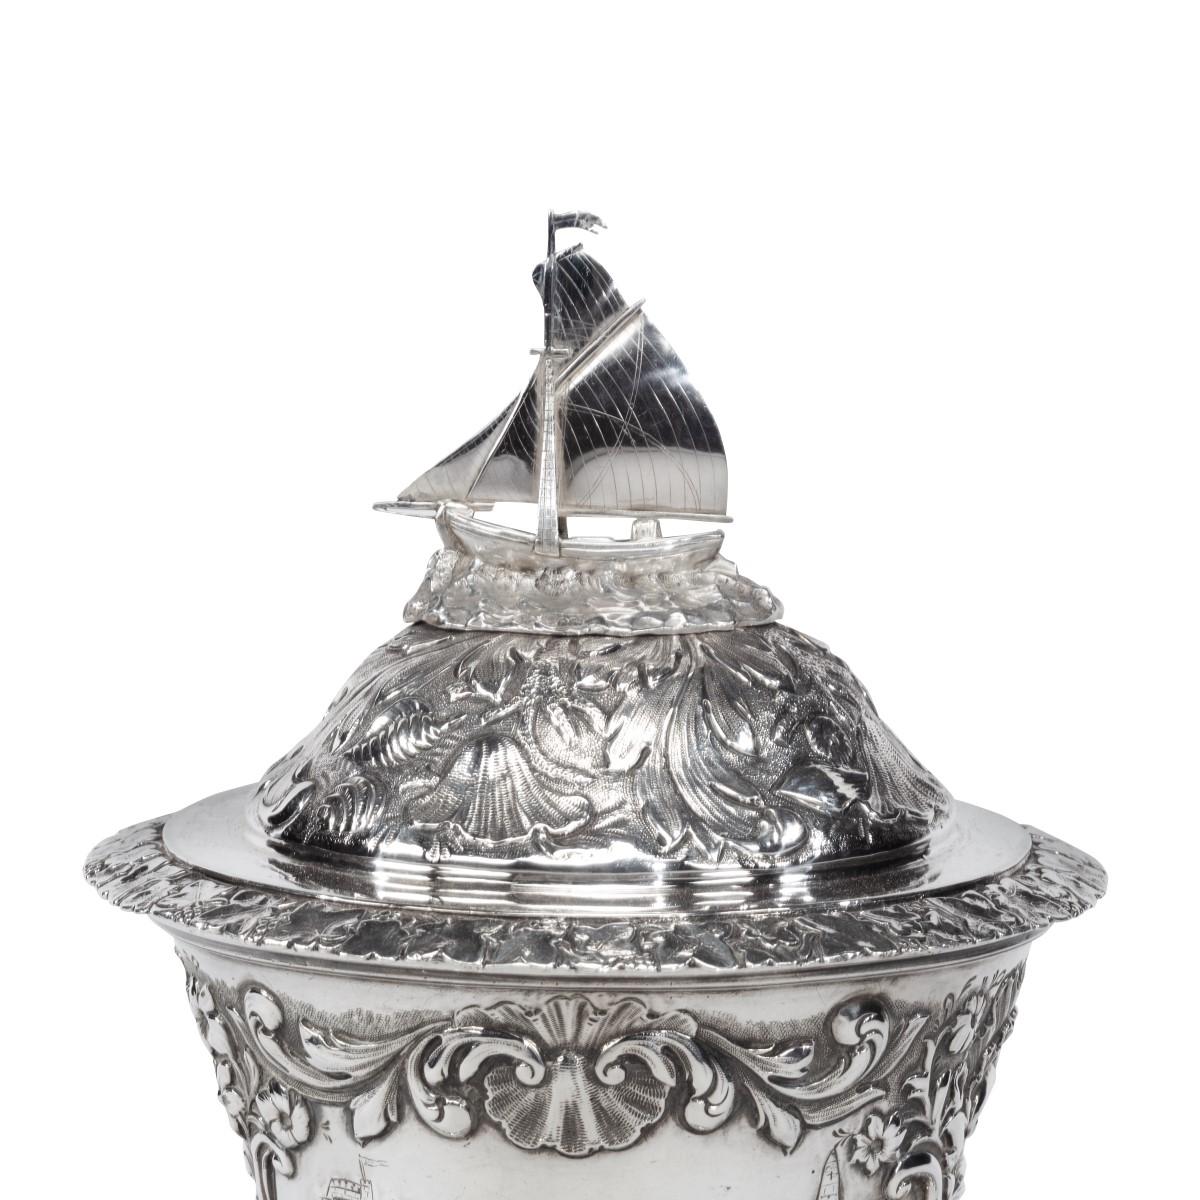 A silver and silver-gilt sailing regatta trophy by Samuel Hayne and Dudley Cater, 1838, embossed on each side with gaff cutters racing above a presentation inscription and surrounded by scrolling acanthus, shells, scrolls and flowers, with shell